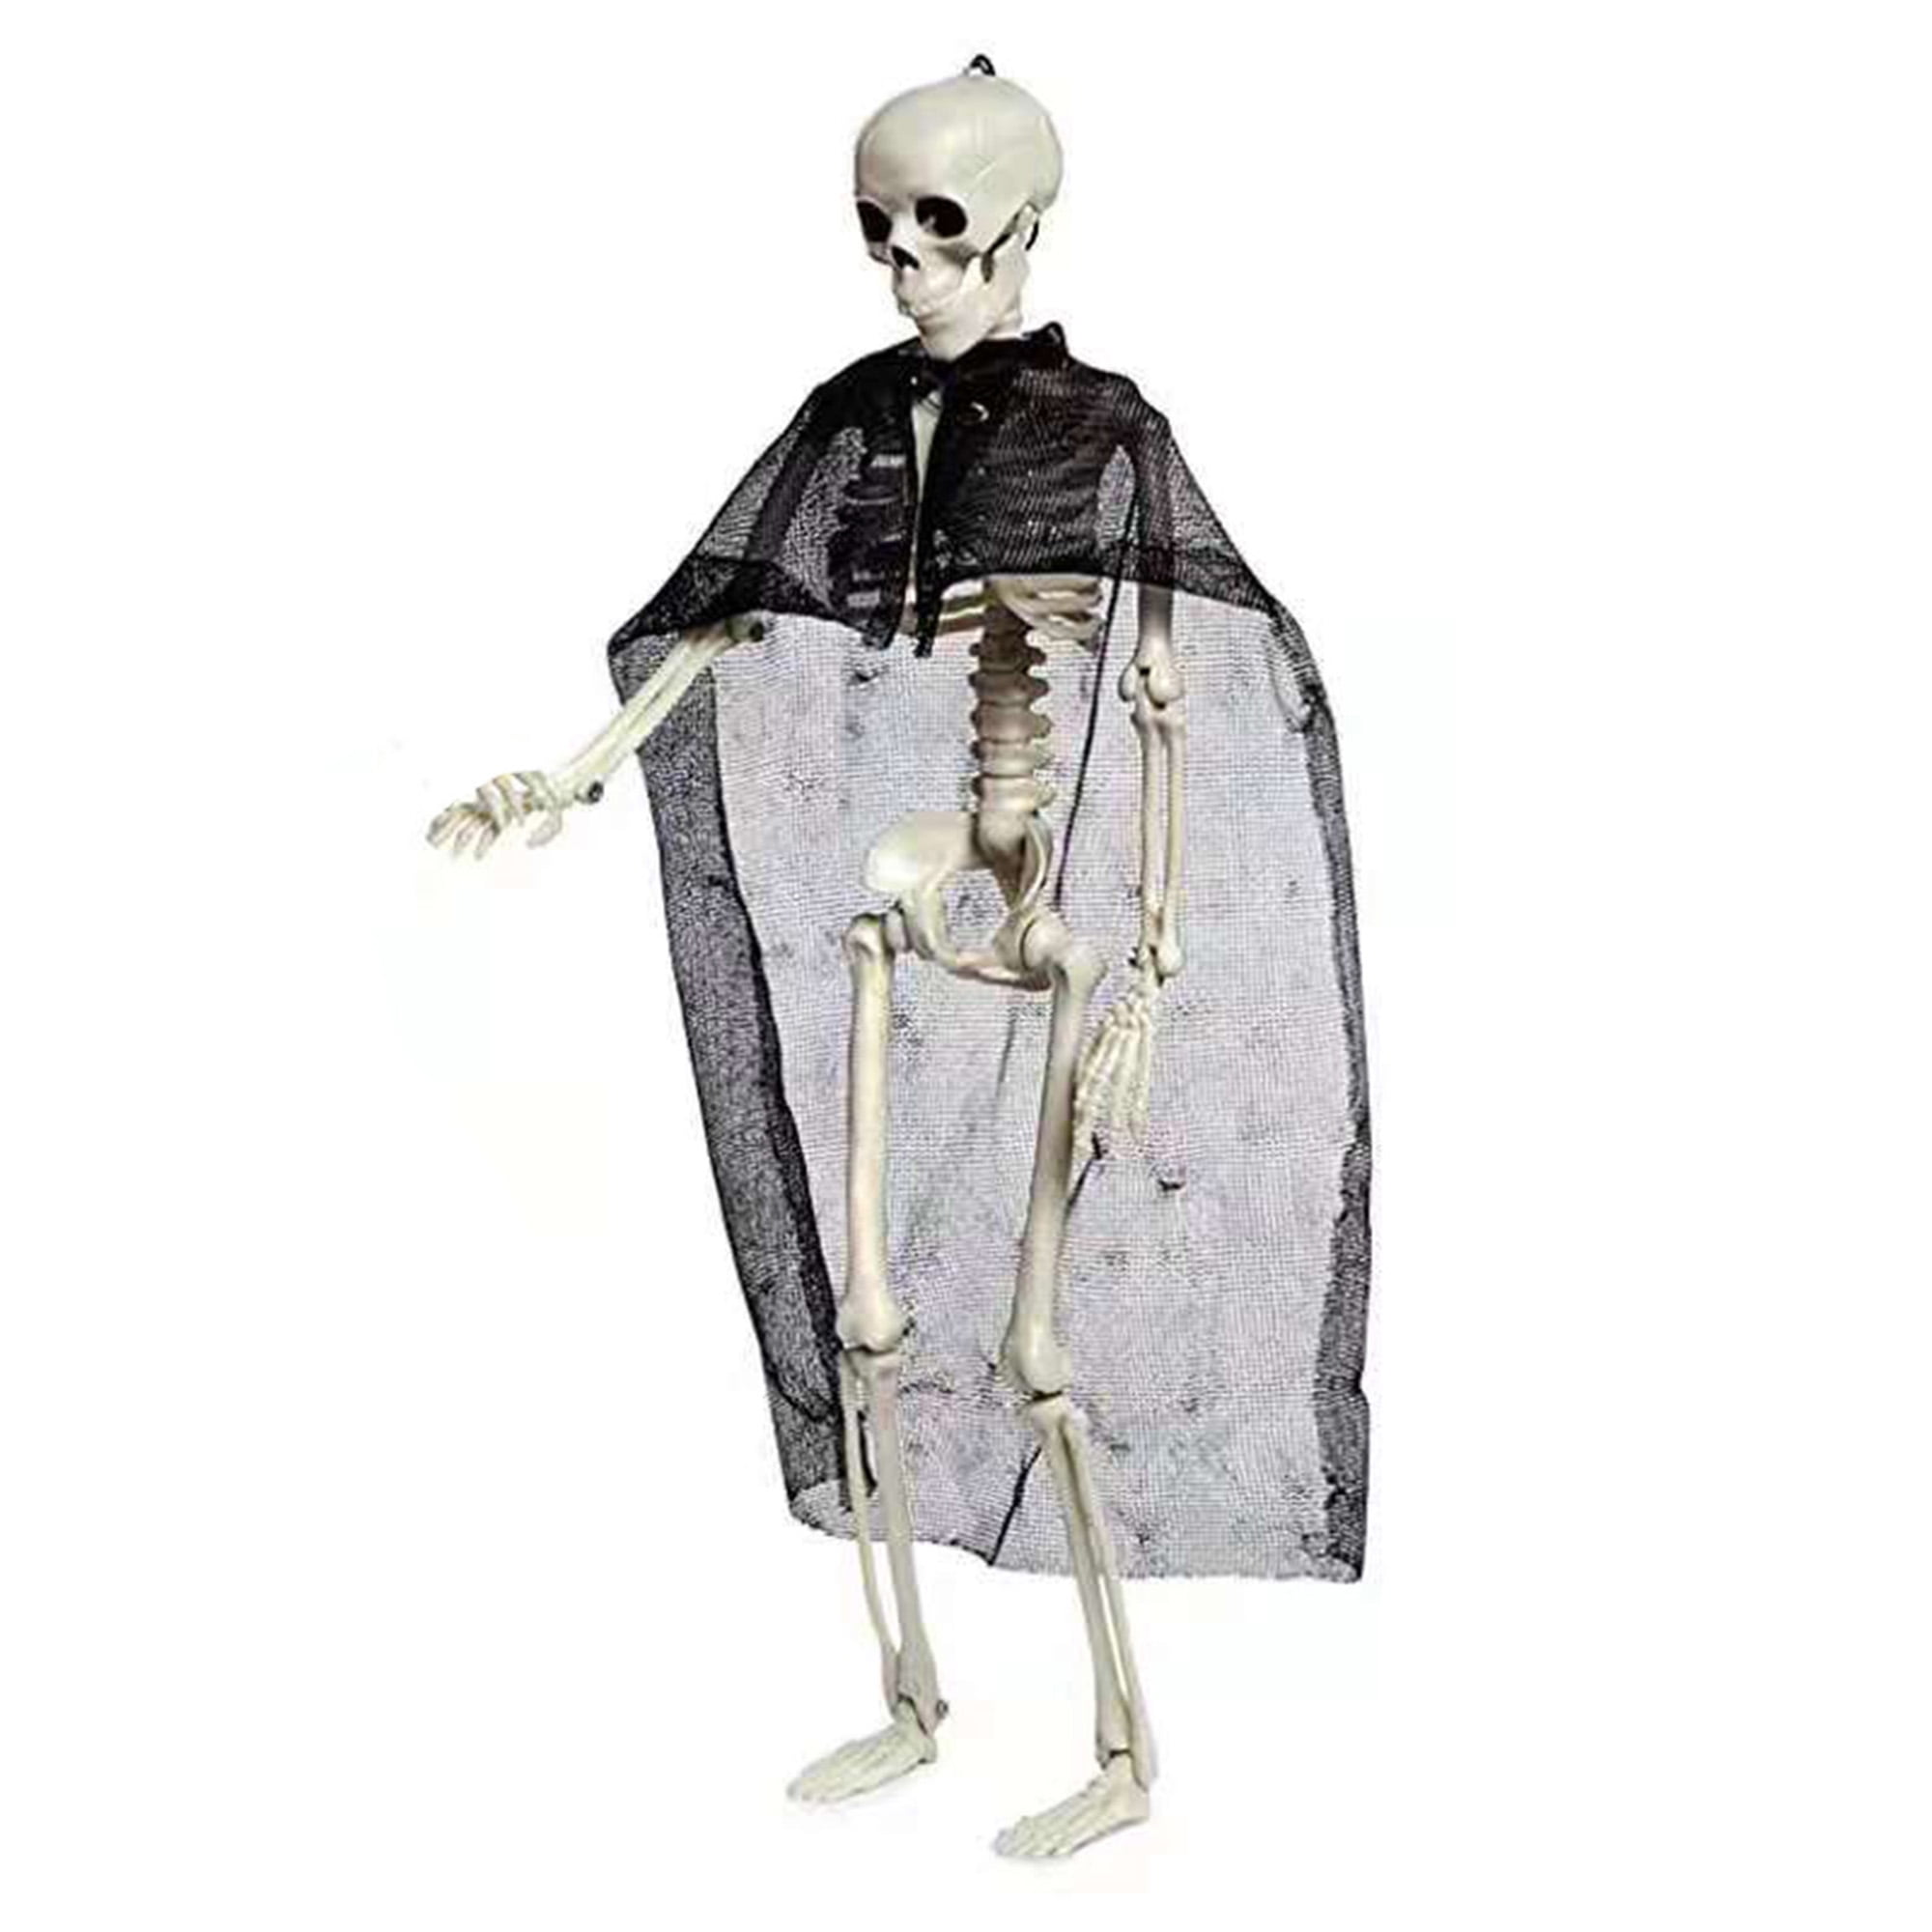 Party Decoration Haunted House Skull Human Skeleton Halloween Props Ghost 